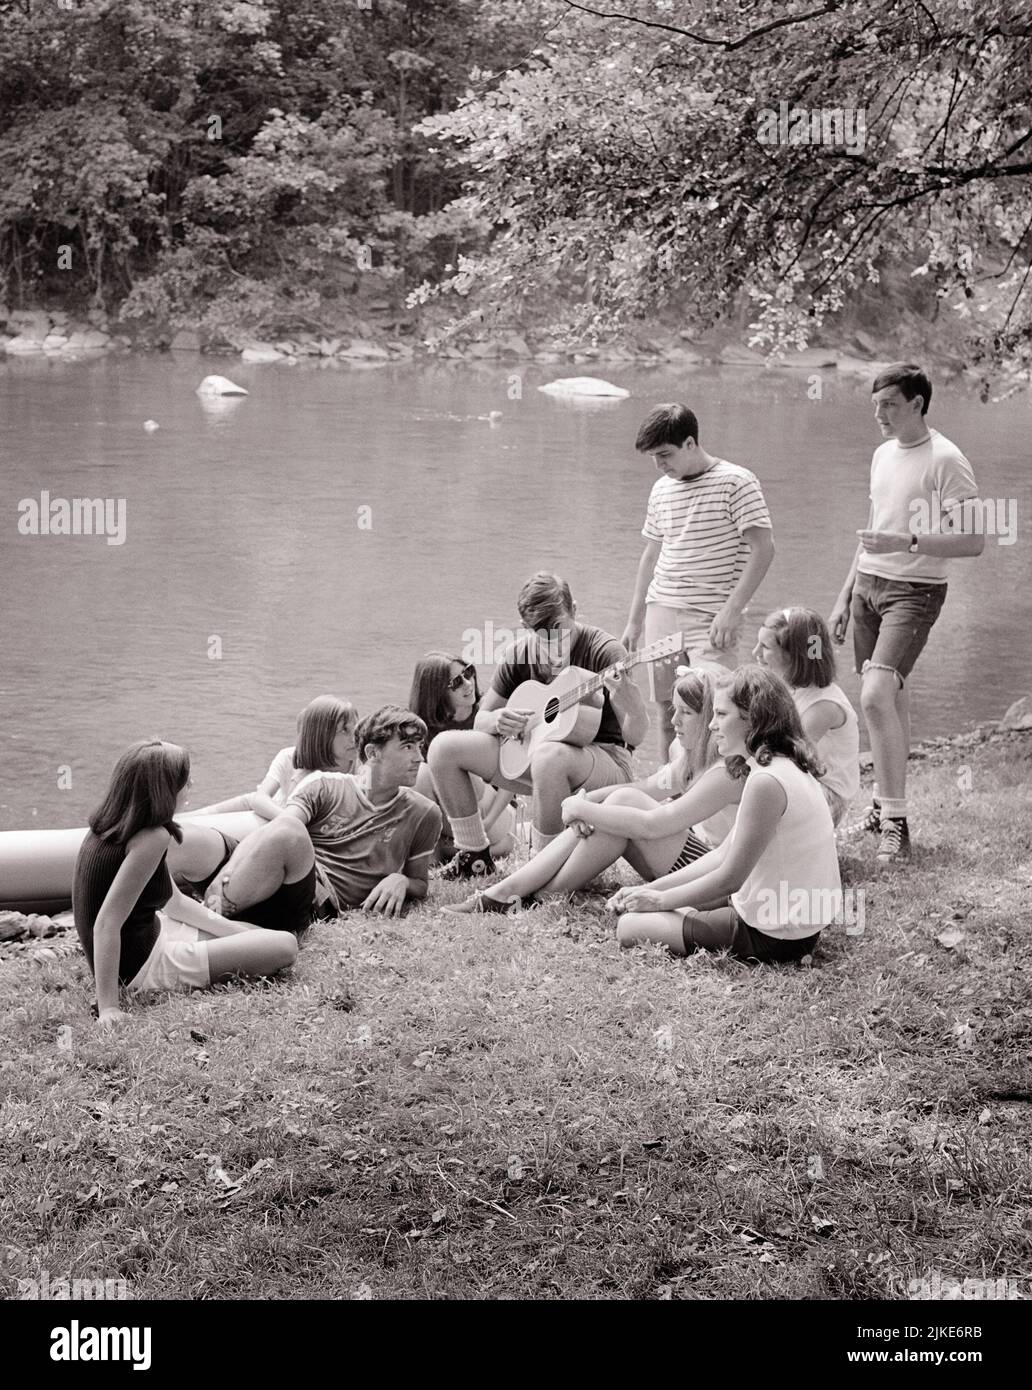 1960s GROUP OF 10 TEENAGERS SITTING TOGETHER AROUND LAKESIDE LISTENING TO ONE BOY PLAY THE GUITAR - j12363 HAR001 HARS TEENAGE GIRL TEENAGE BOY ENTERTAINMENT SIBLINGS SISTERS B&W LAKESIDE HIGH ANGLE ADVENTURE LEISURE RECREATION SIBLING CONNECTION 10 SUPPORT TEENAGED COOPERATION JUVENILES TOGETHERNESS BLACK AND WHITE CAUCASIAN ETHNICITY HAR001 OLD FASHIONED Stock Photo